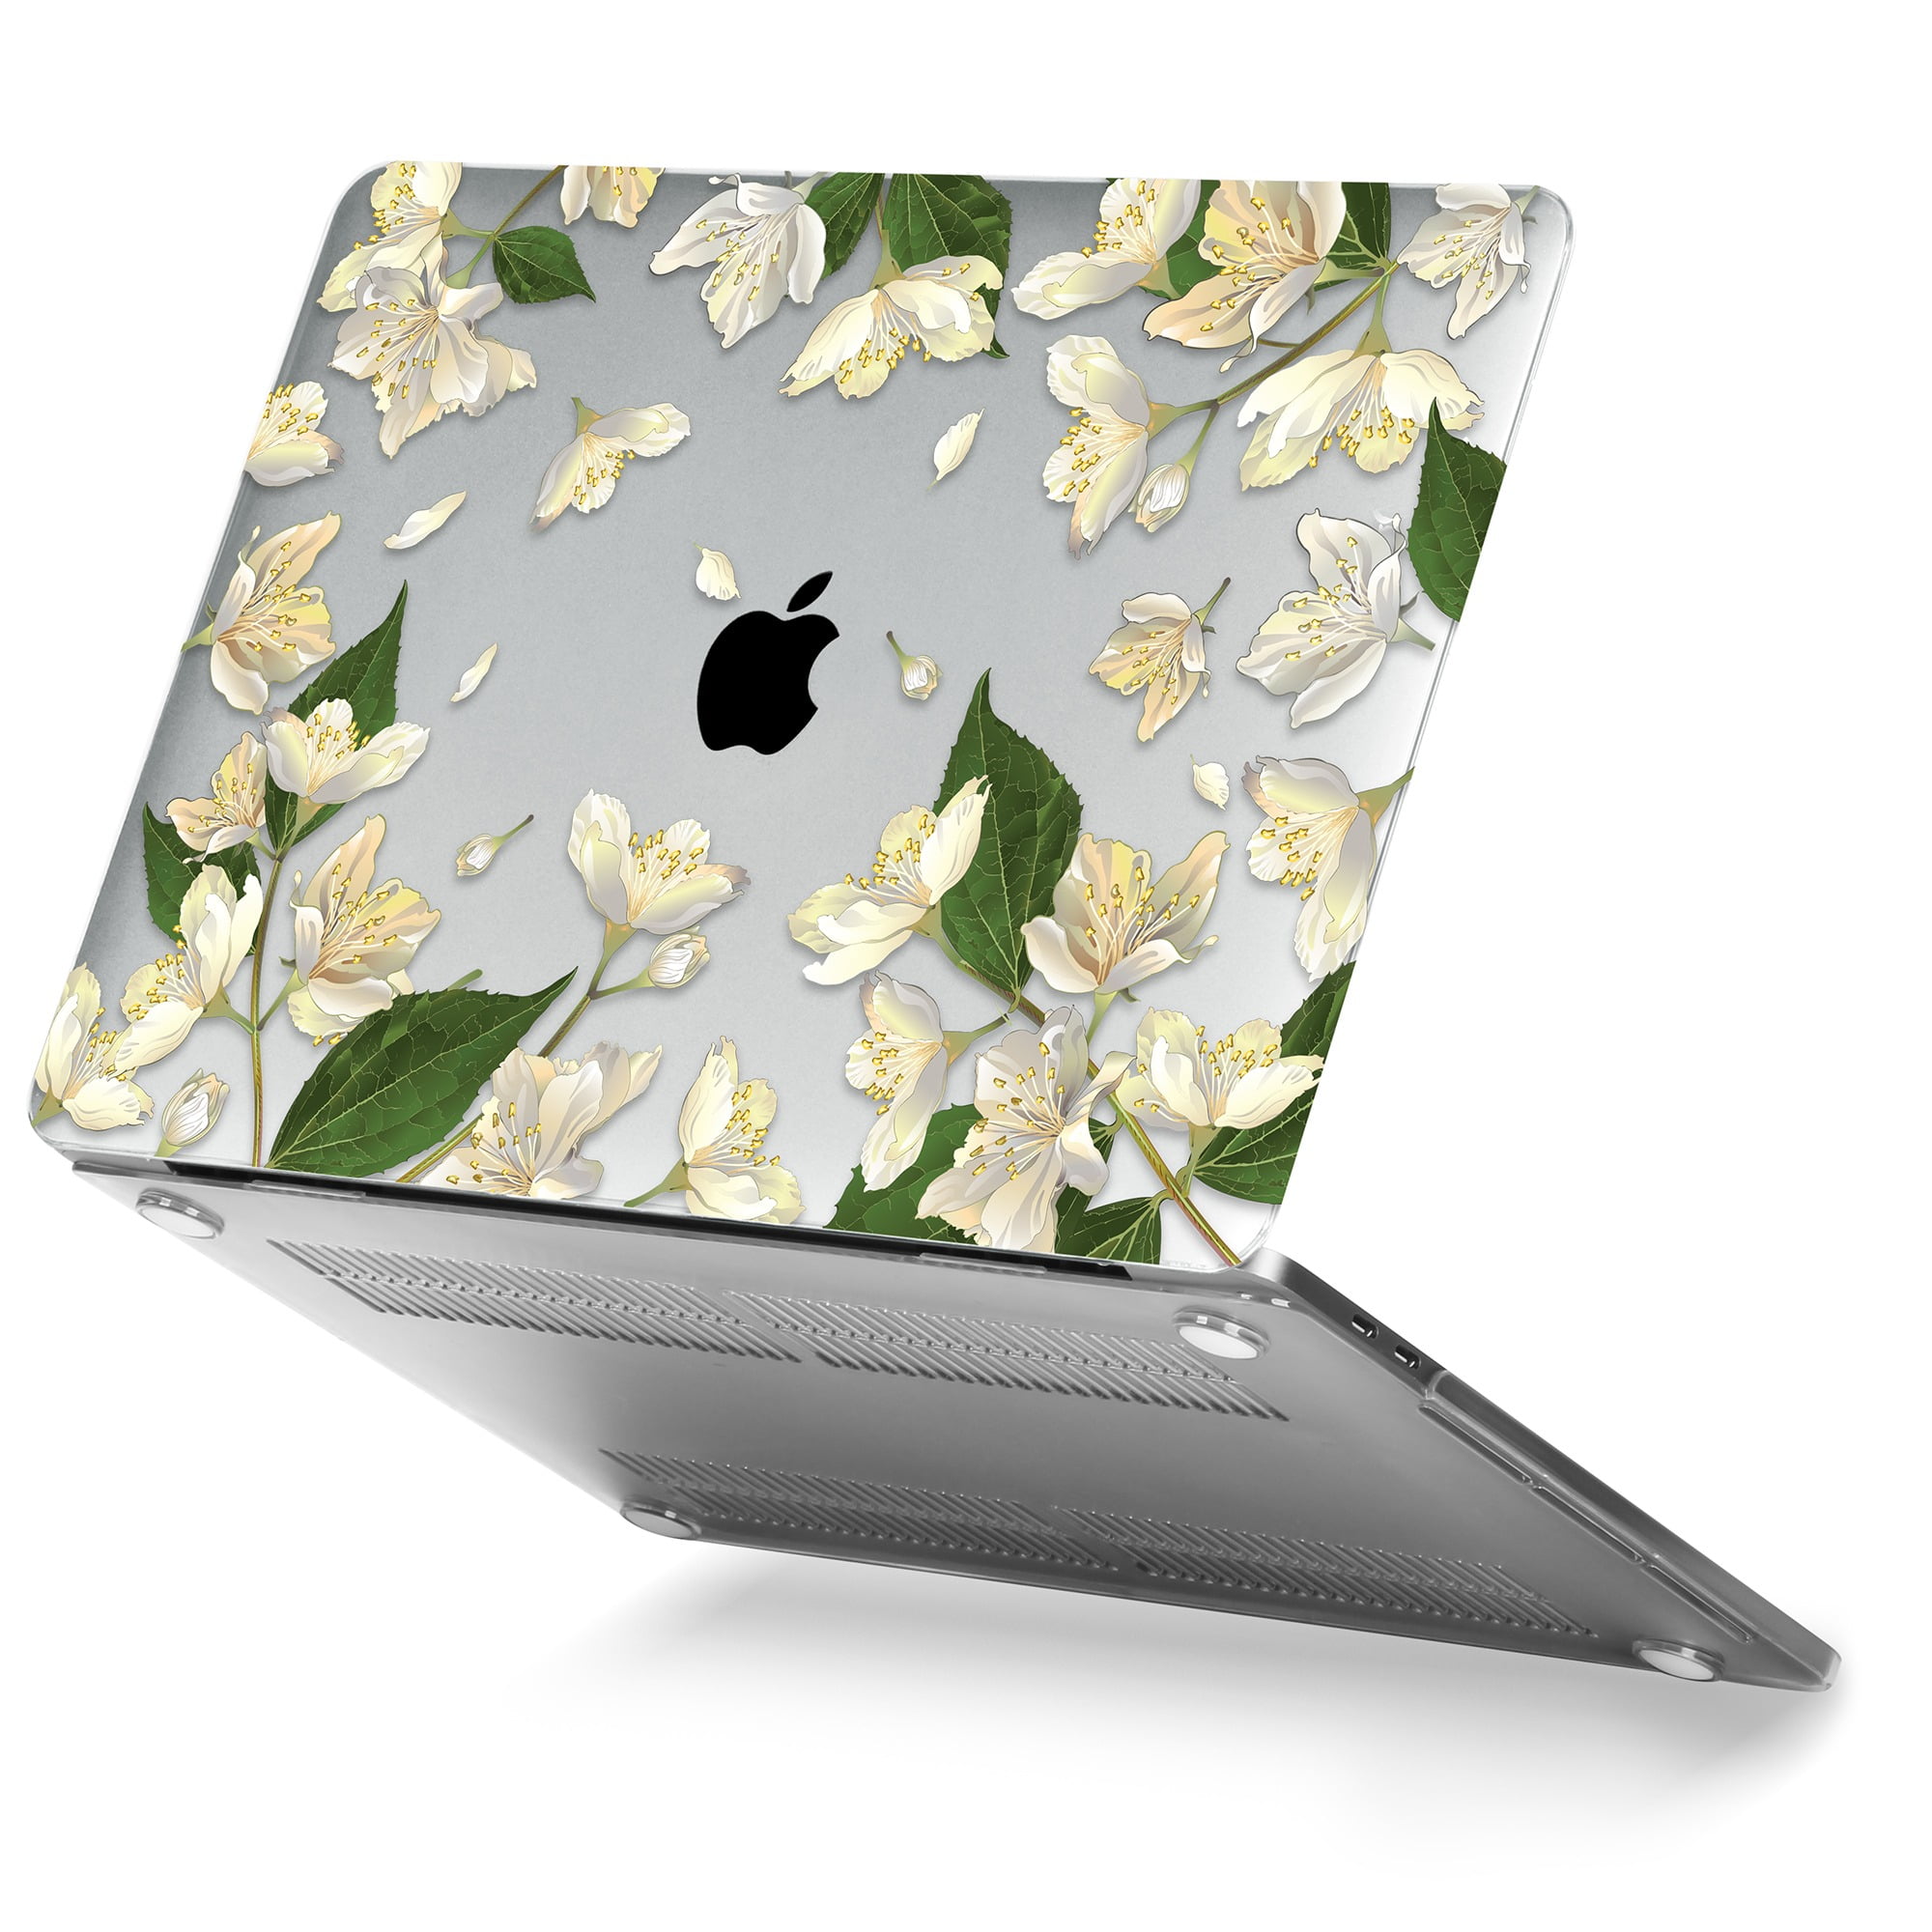 Garden Flower GMYLE MacBook Pro 13 Inch Case 2018 with Touch Bar Soft-Touch Smooth Snap On Matte Plastic Hard Clear Cover for Apple Mac Pro 13 A1989 A1706 A1708 2016 2017 Release 